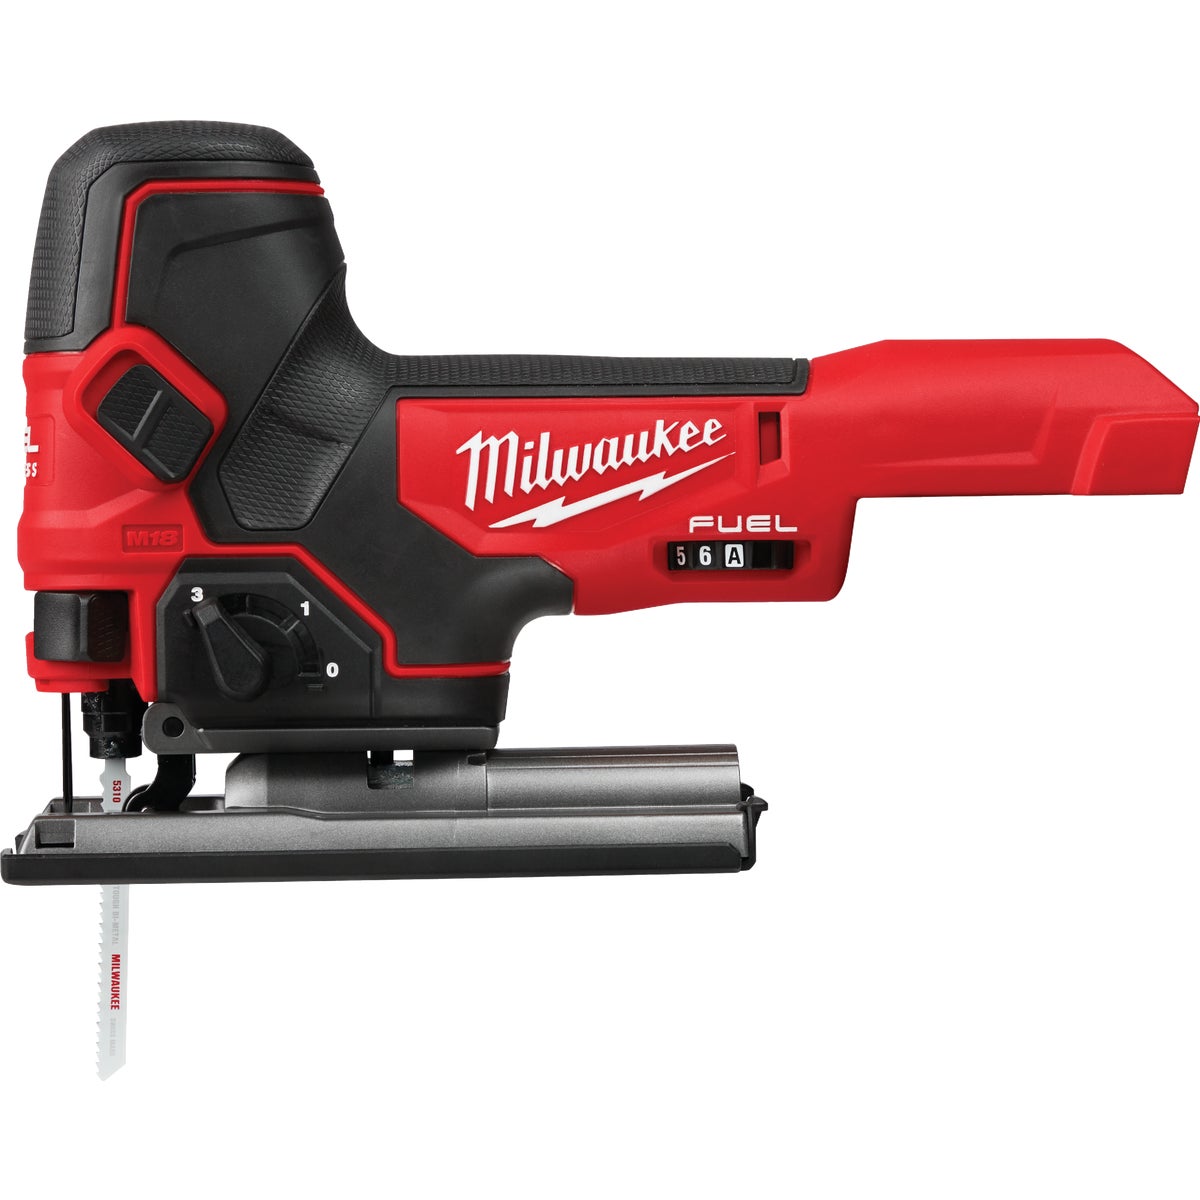 Milwaukee M18 FUEL 18 Volt Lithium-Ion Brushless Barrel Grip Cordless Jig Saw (Tool Only)